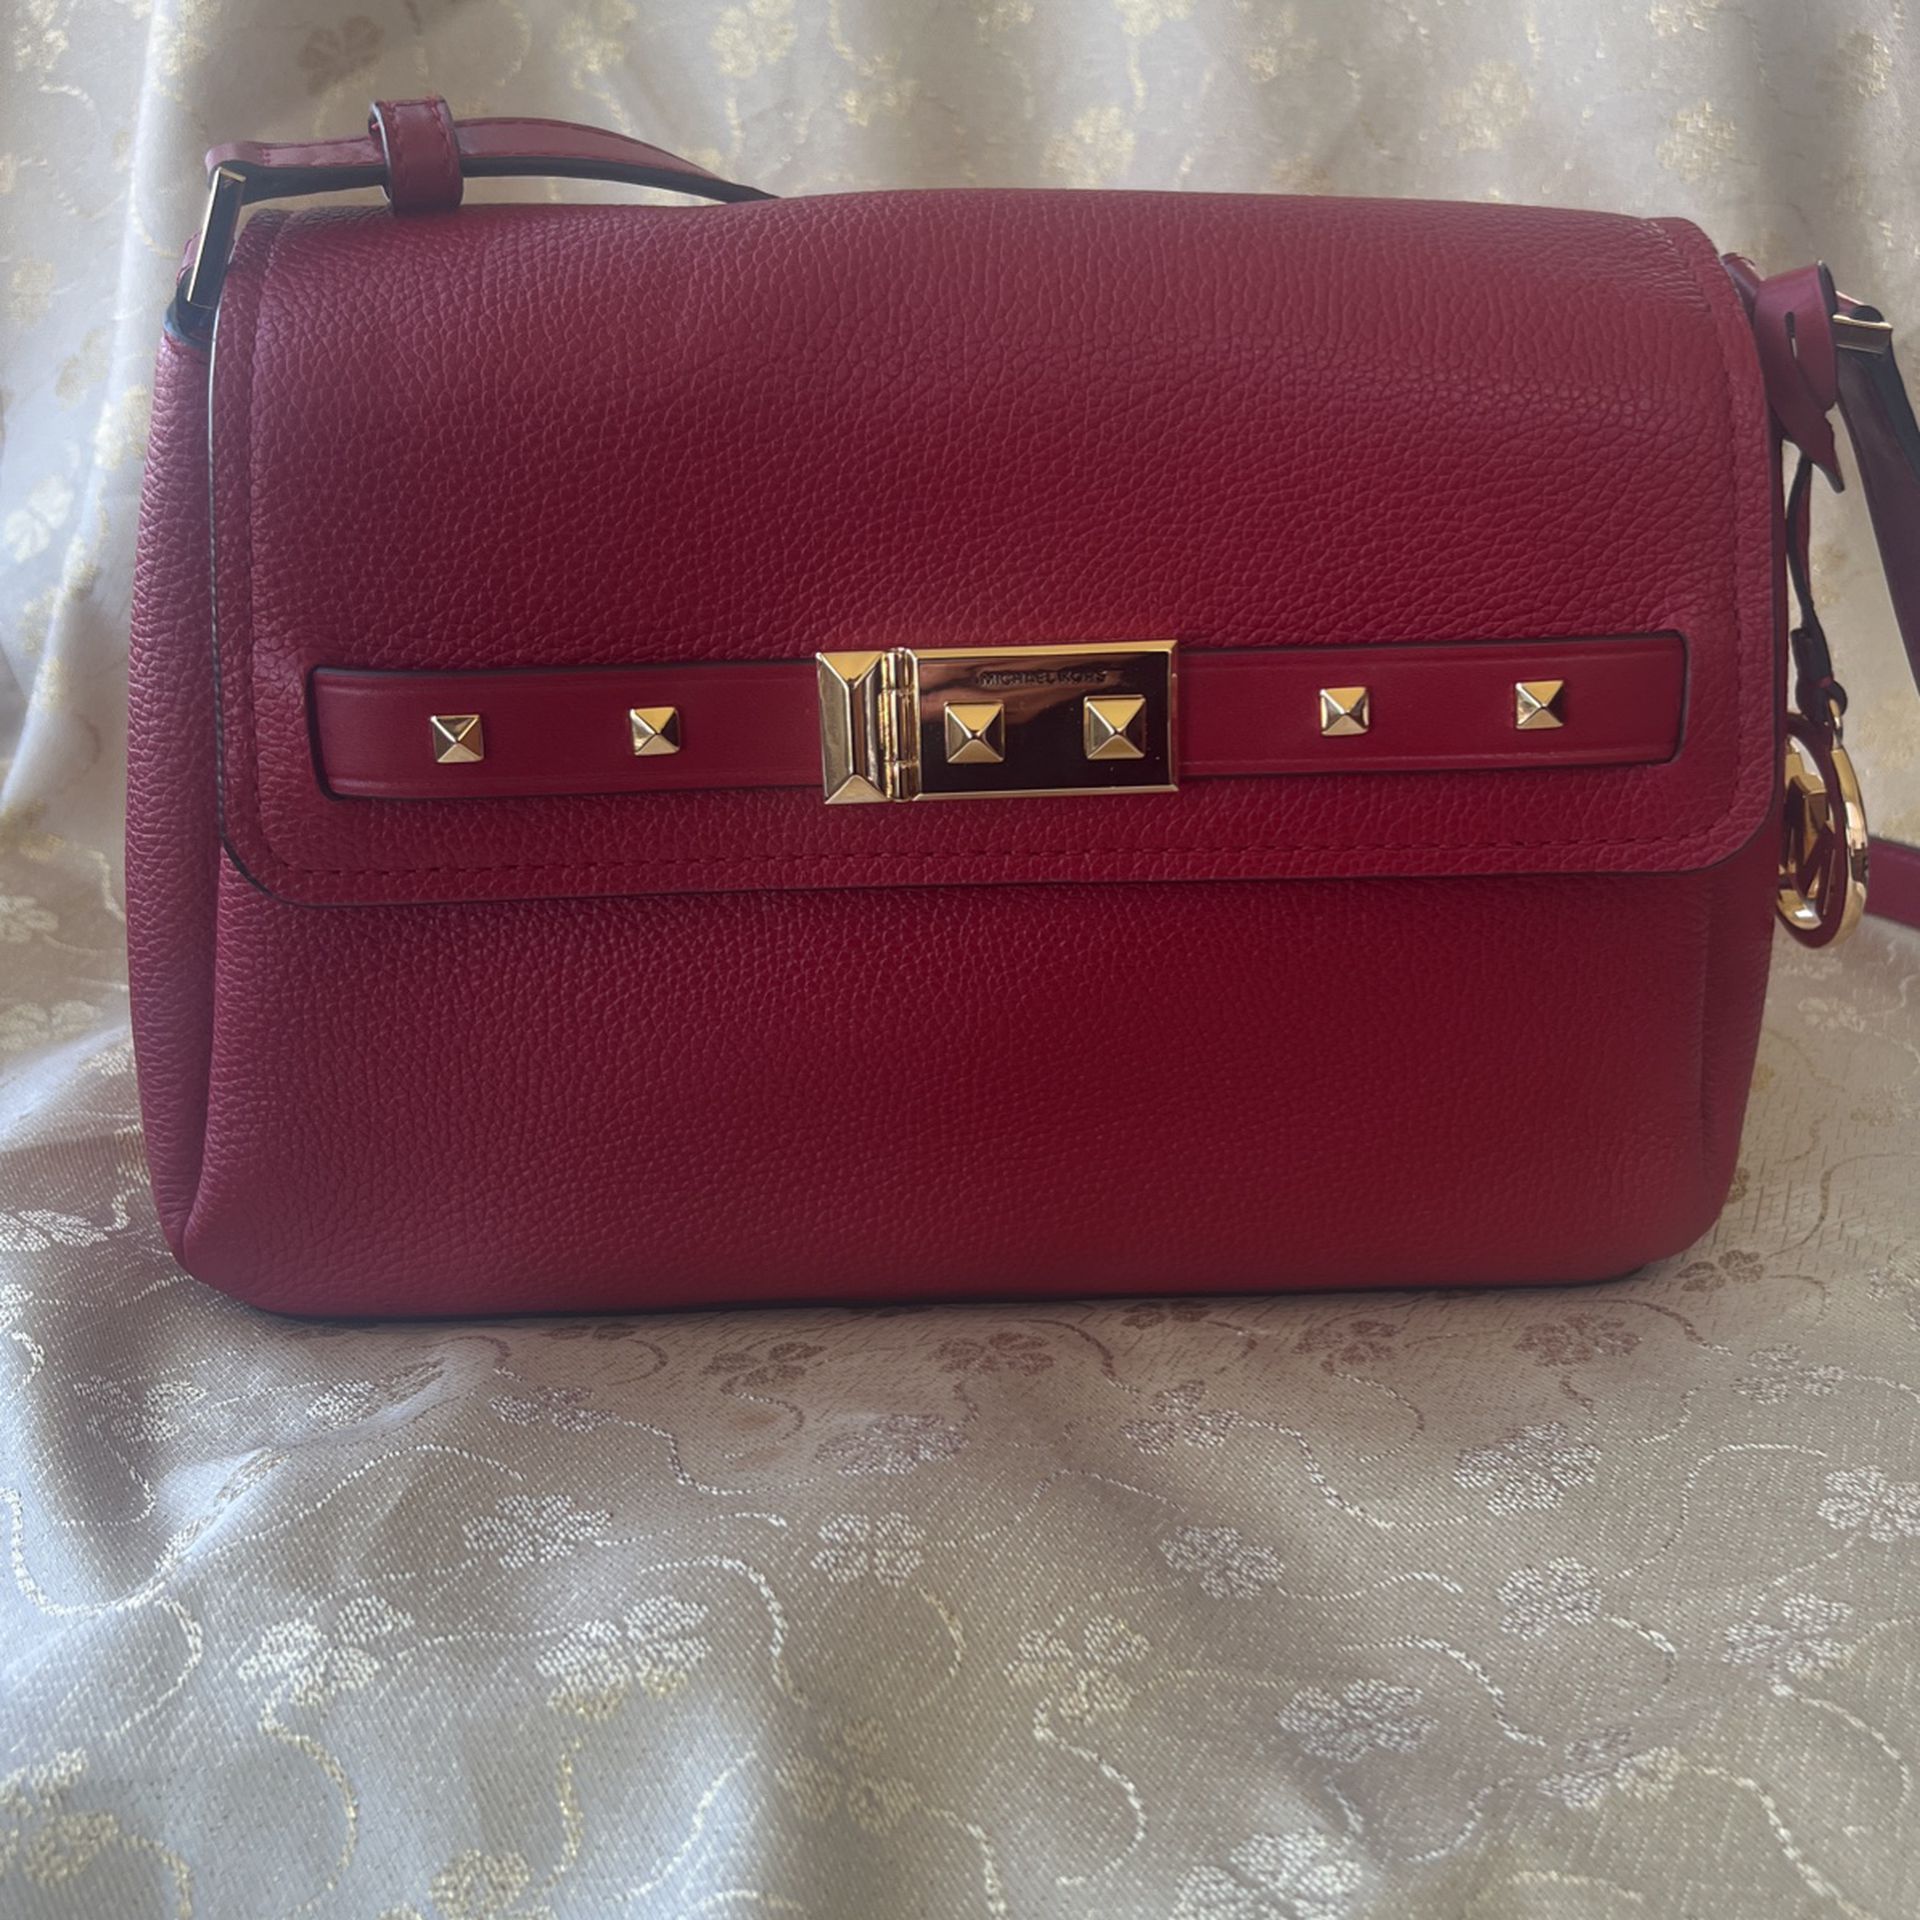 Red Leather Michael Kors Cross Body Bag For Women Excellent Condition